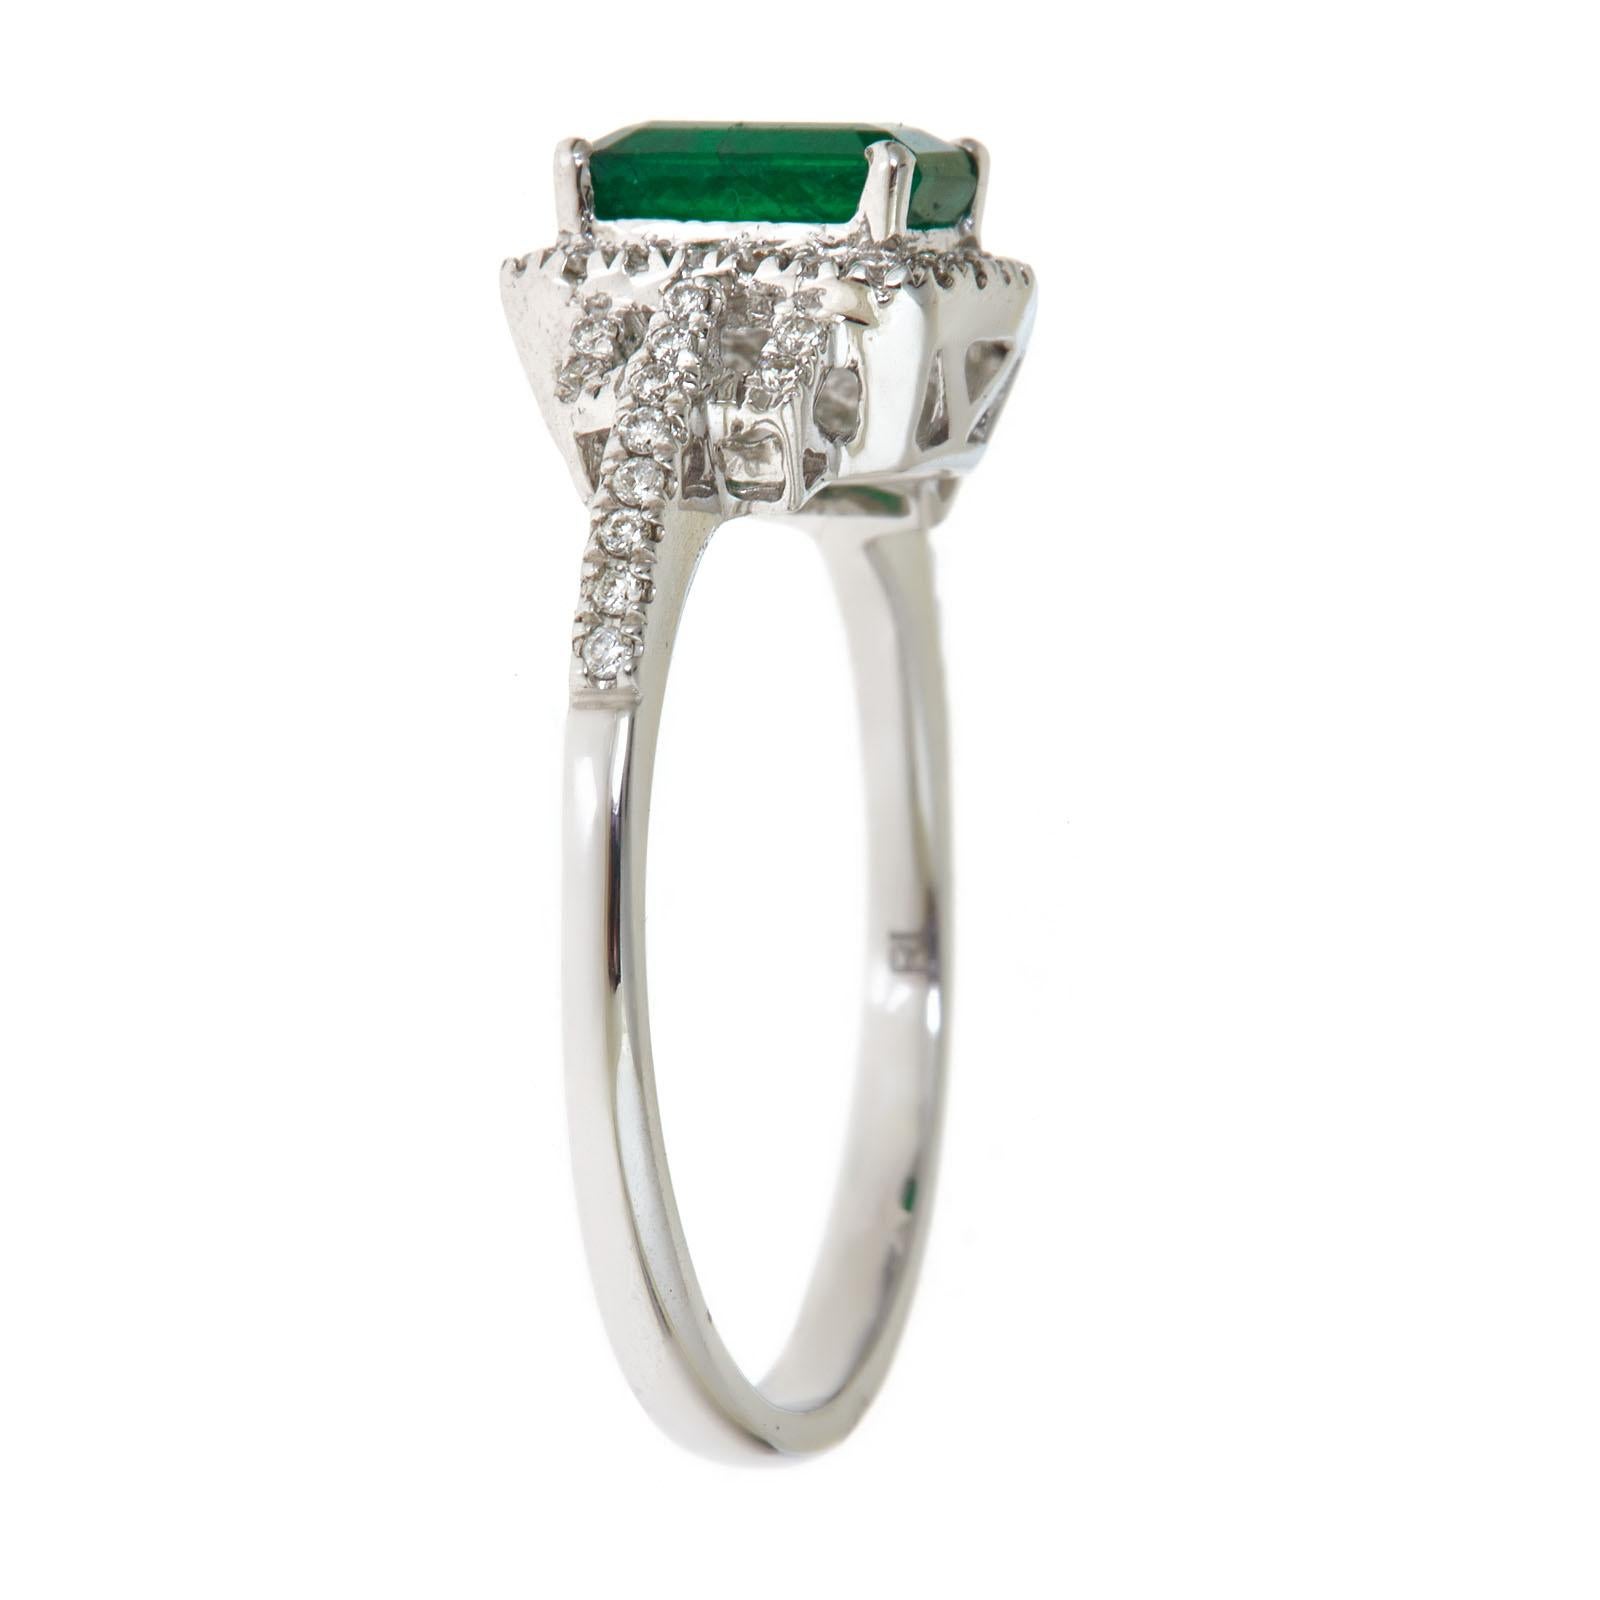 This beautiful Natural Emerald Ring is crafted in 14-karat White gold and features a 0.94 carat 1 Pc Emerald and 48 Pcs Round White Diamonds in GH- I1 quality with 0.18 Ct in a prong-setting. 
This Ring comes in sizes 6 to 9, and it is a perfect